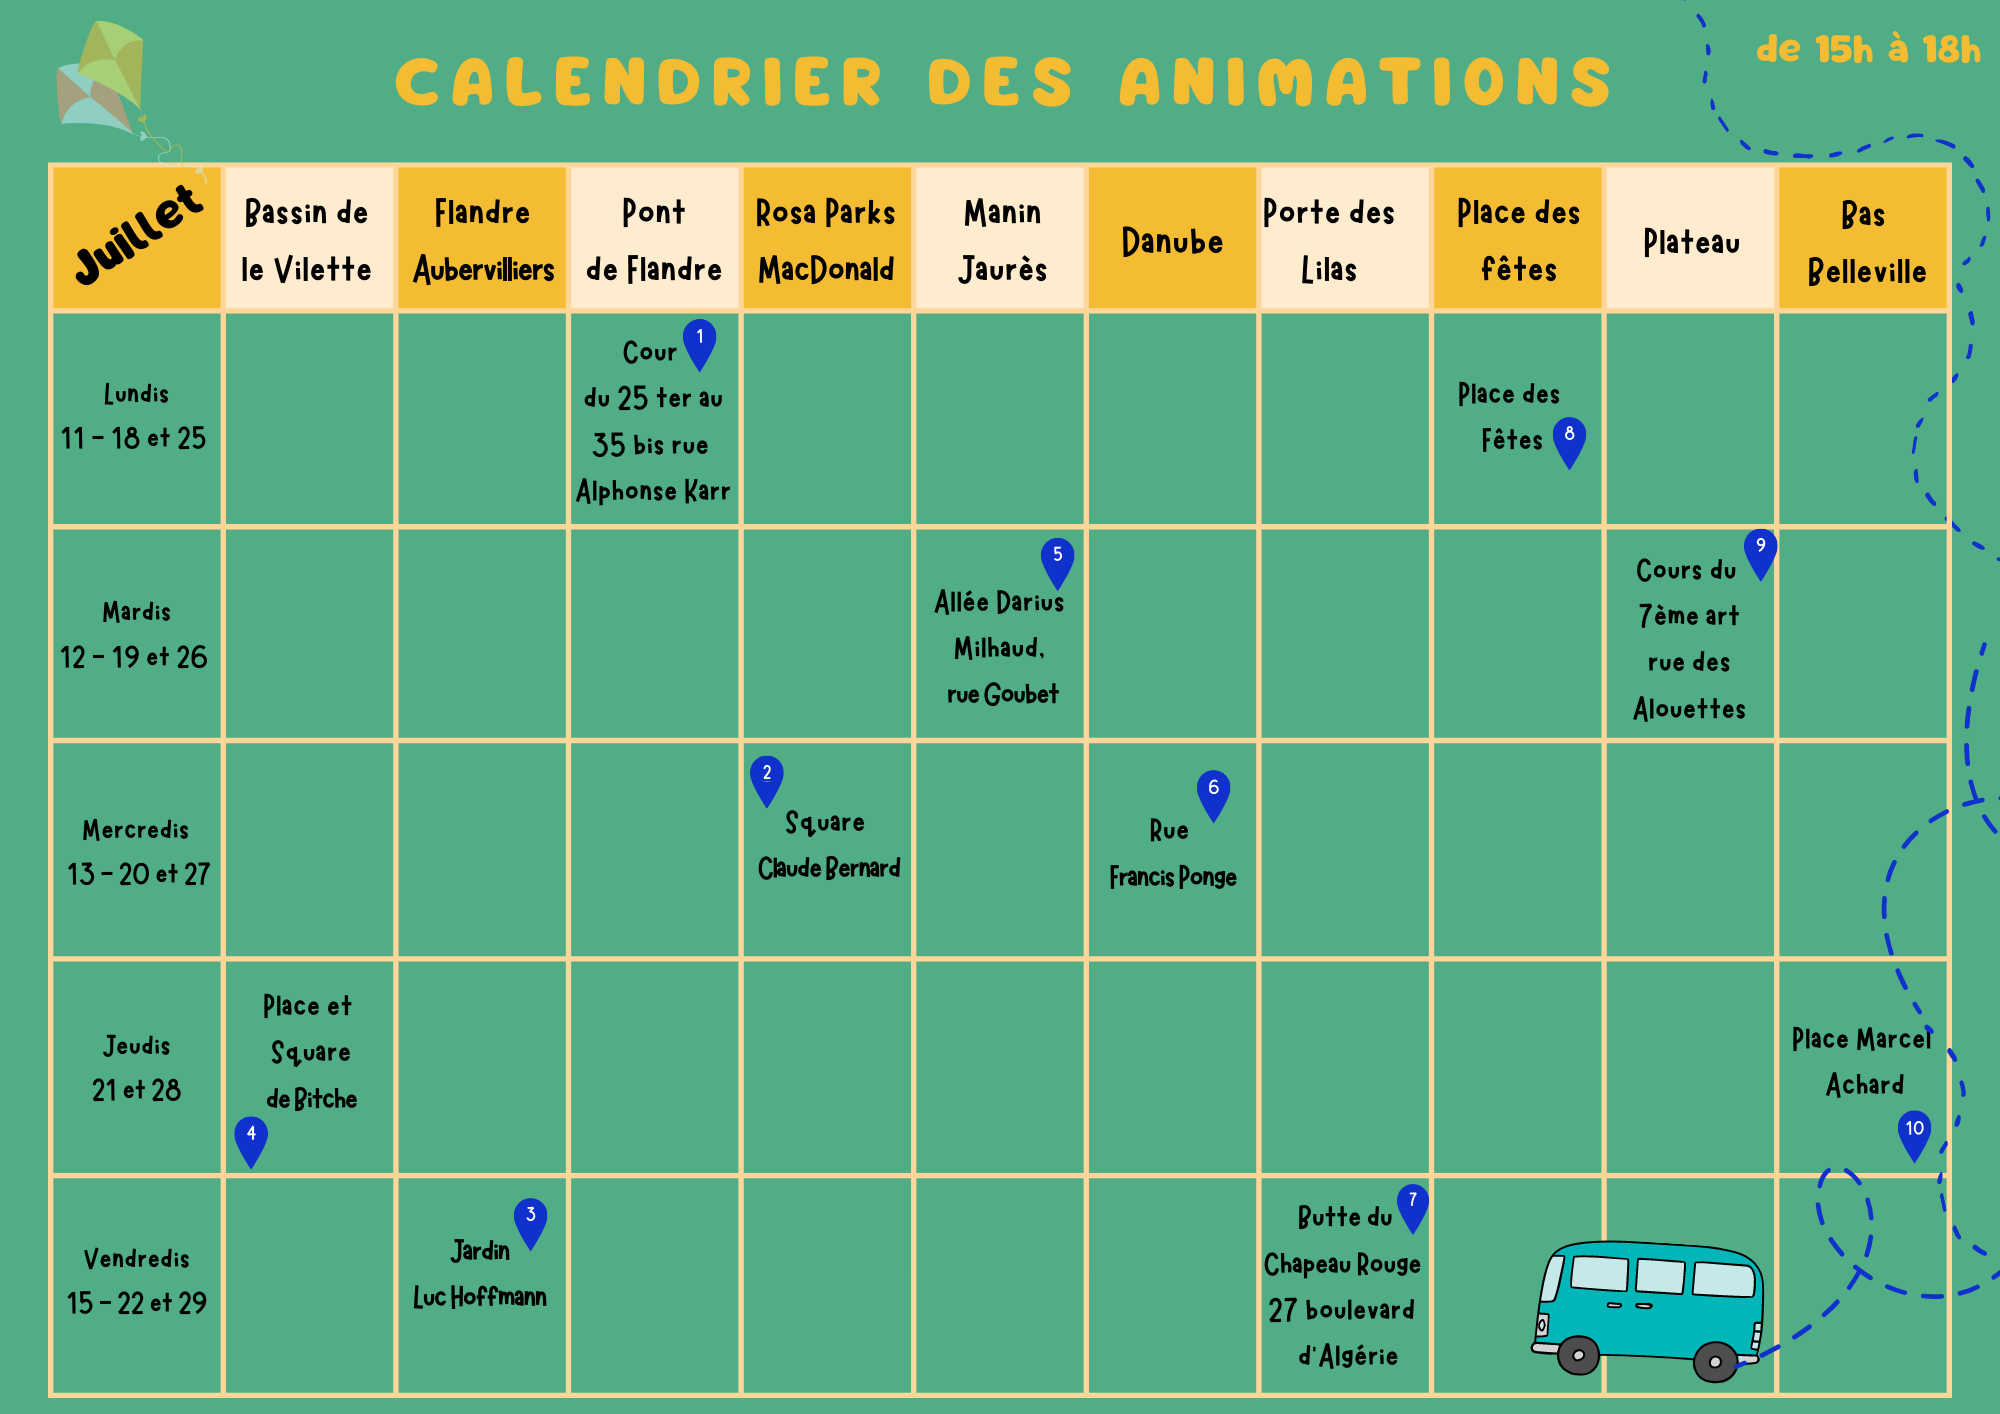 Calendrier des animations